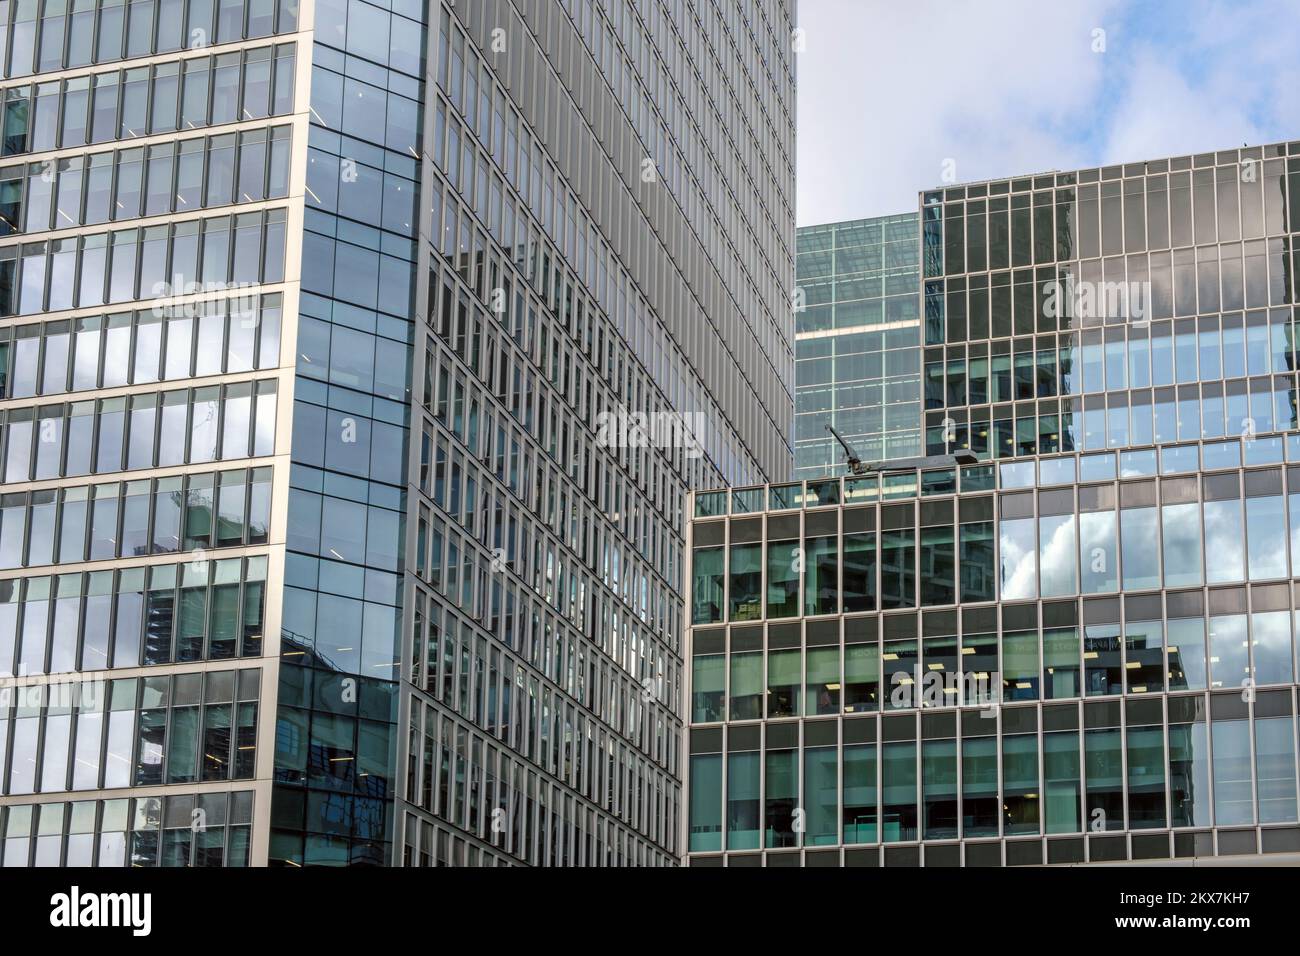 Detail of geometric skyscrapers with reflective, rectangle windows at Canary Wharf, London. Stock Photo